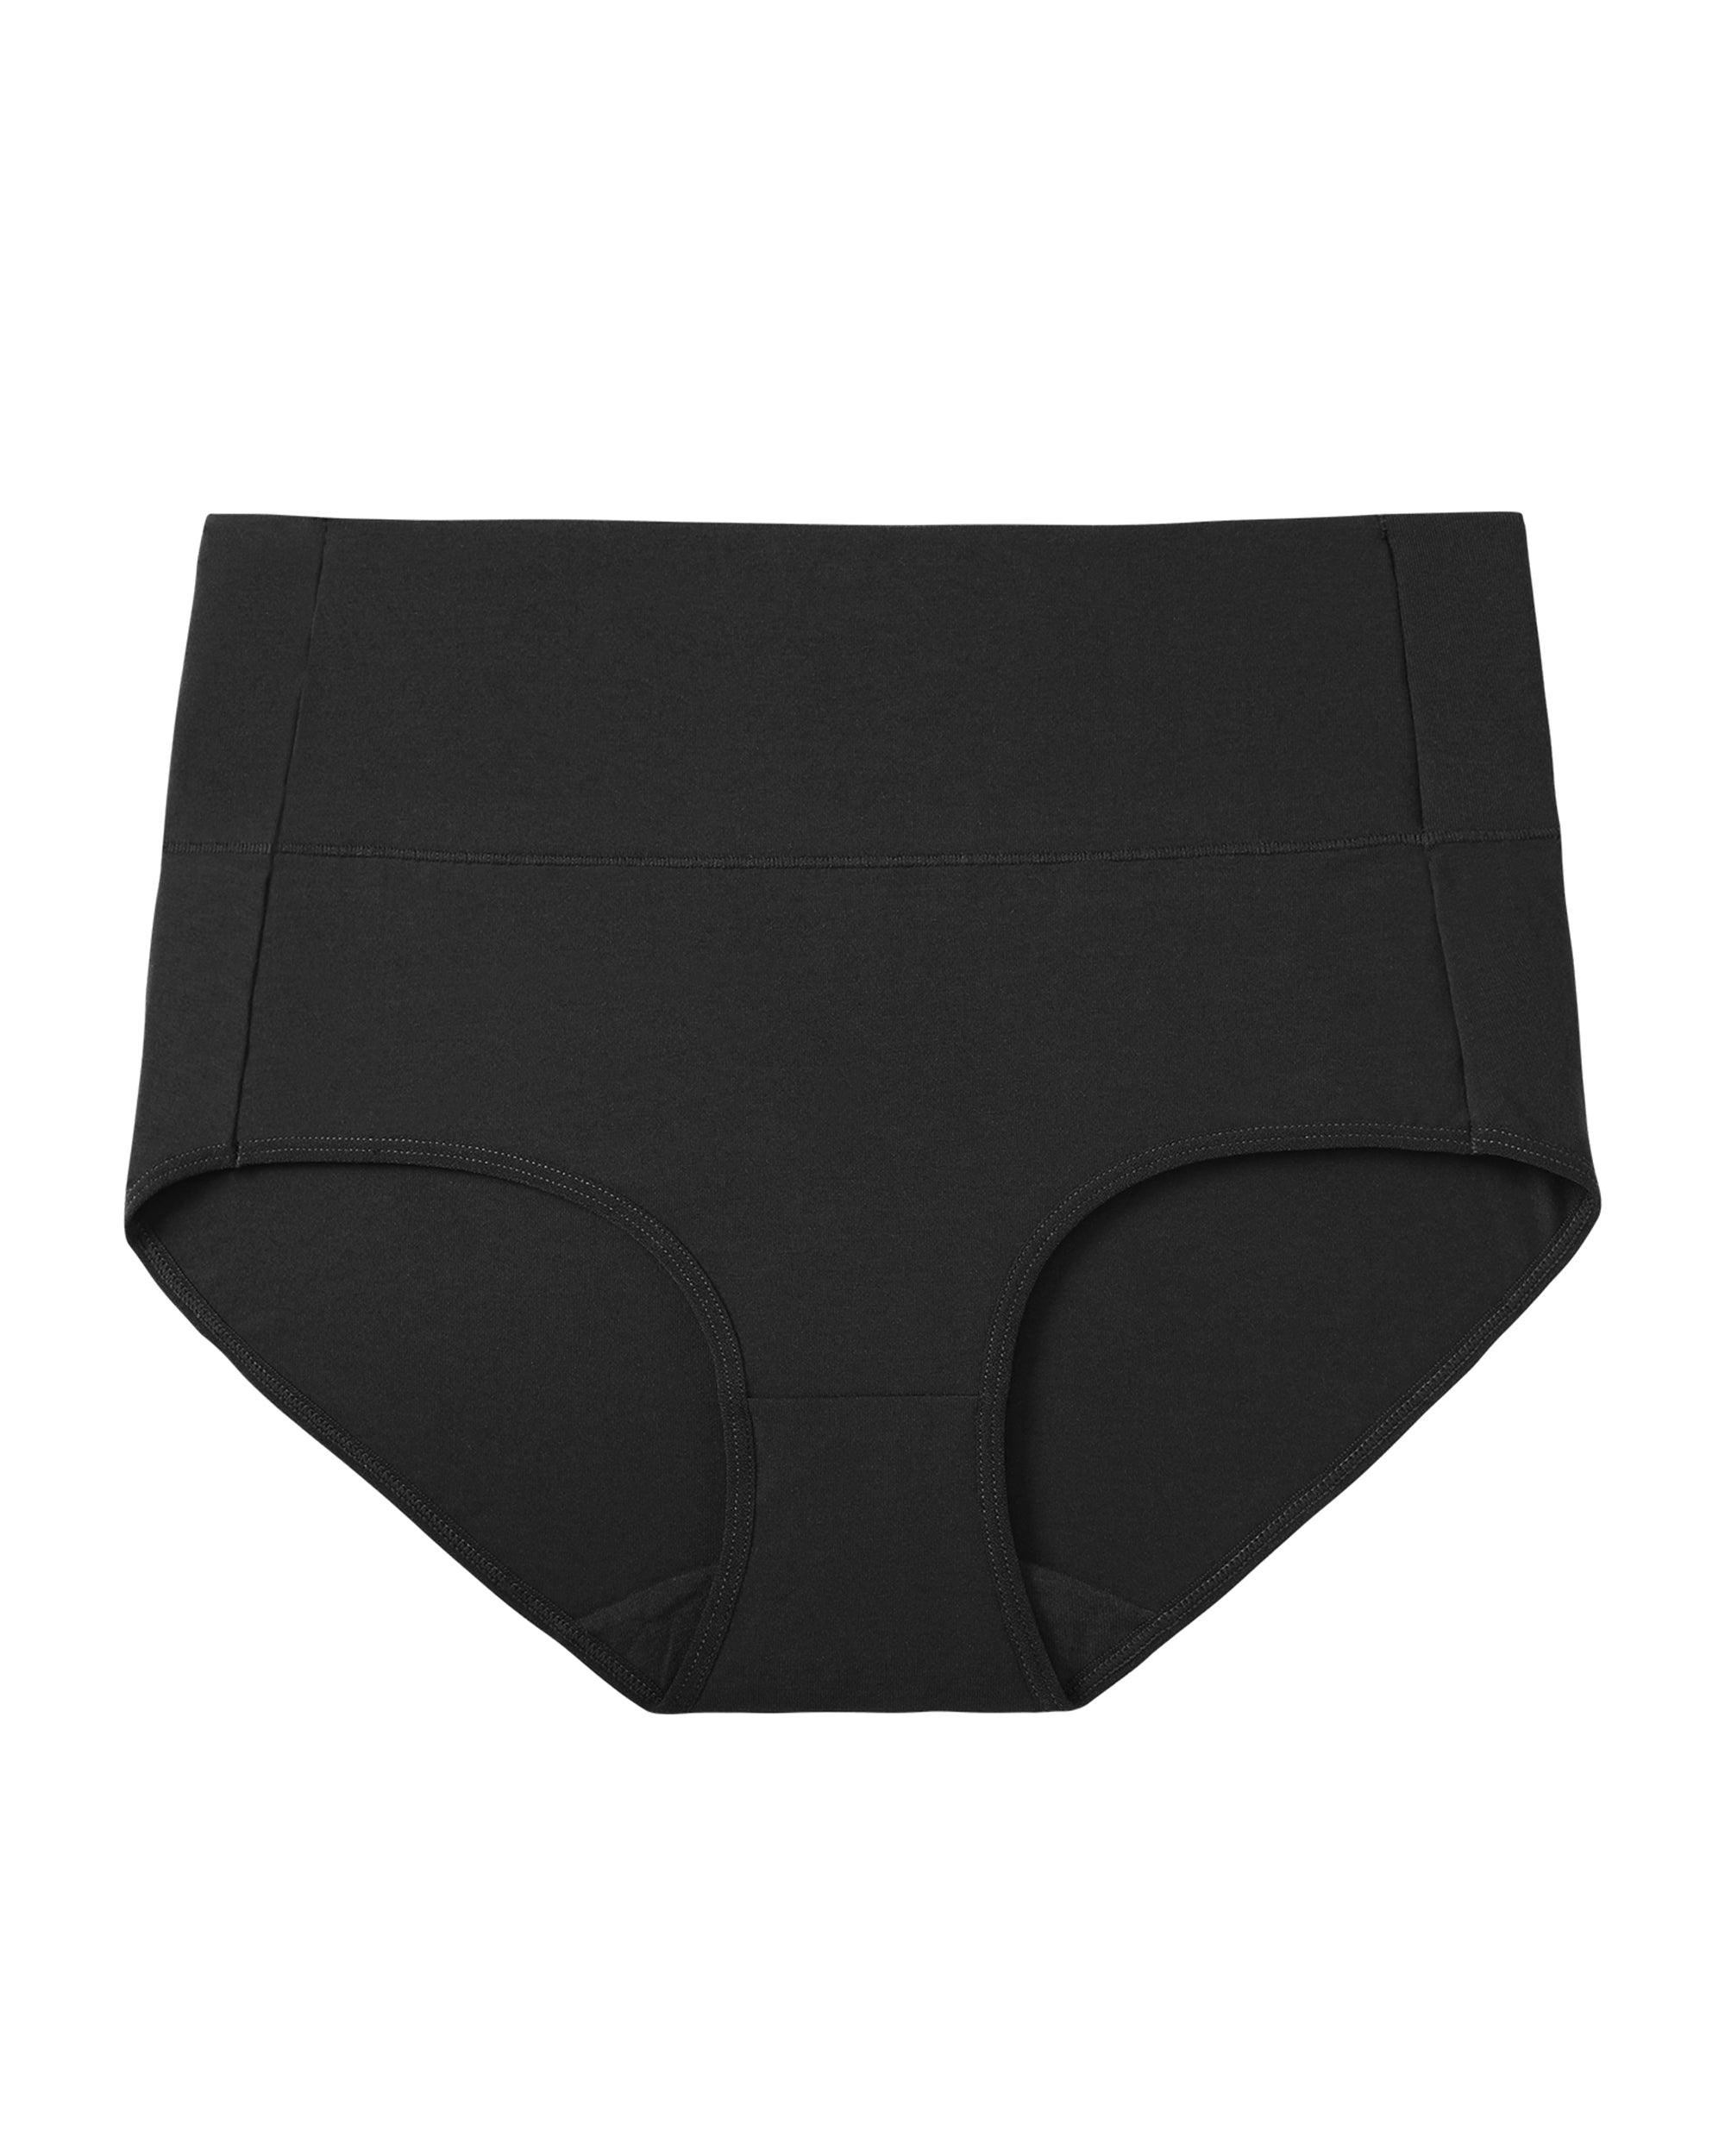 TrueShapers Women's Seamless Tech High-Waist Comfy Control Panty Black Size  S at  Women's Clothing store